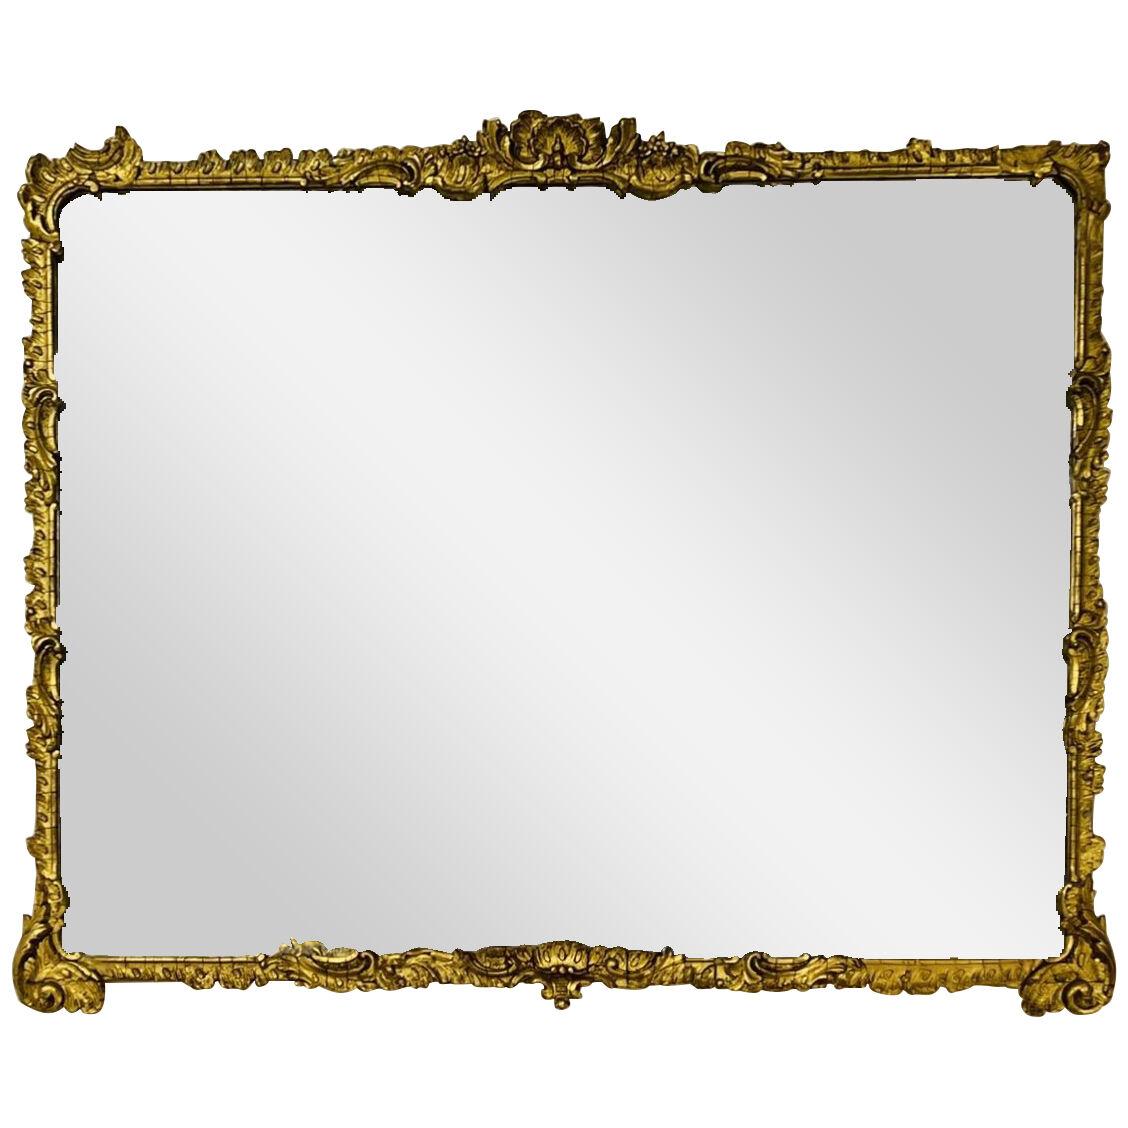 Giltwood Gesso Wall or Console Mirrors, Beveled Mirror, Circa 1930s